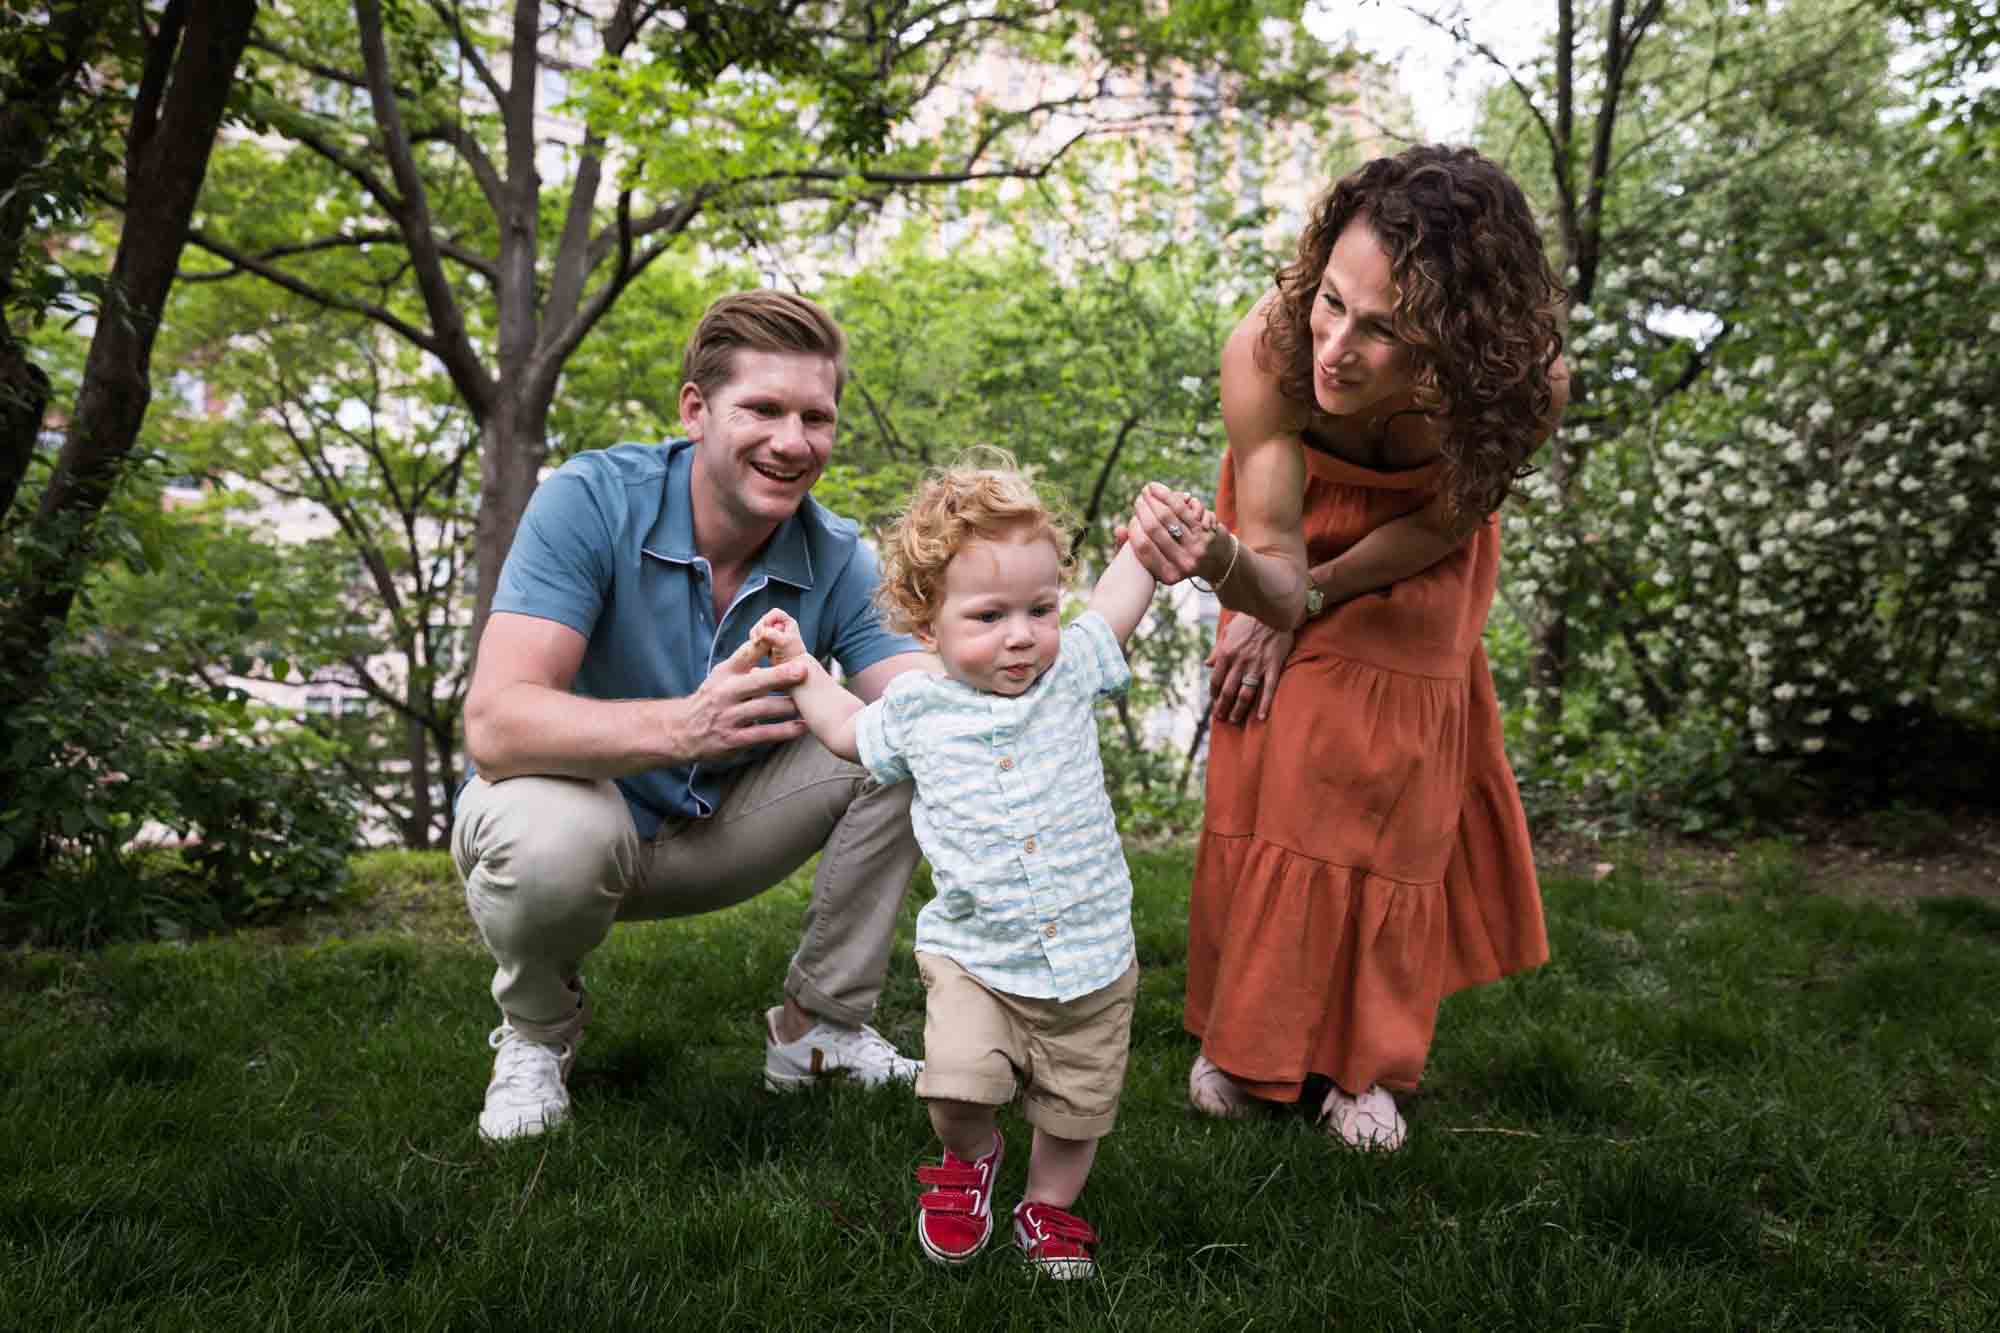 Mother and father helping red-haired baby boy walk in grass during a Central Park family portrait session